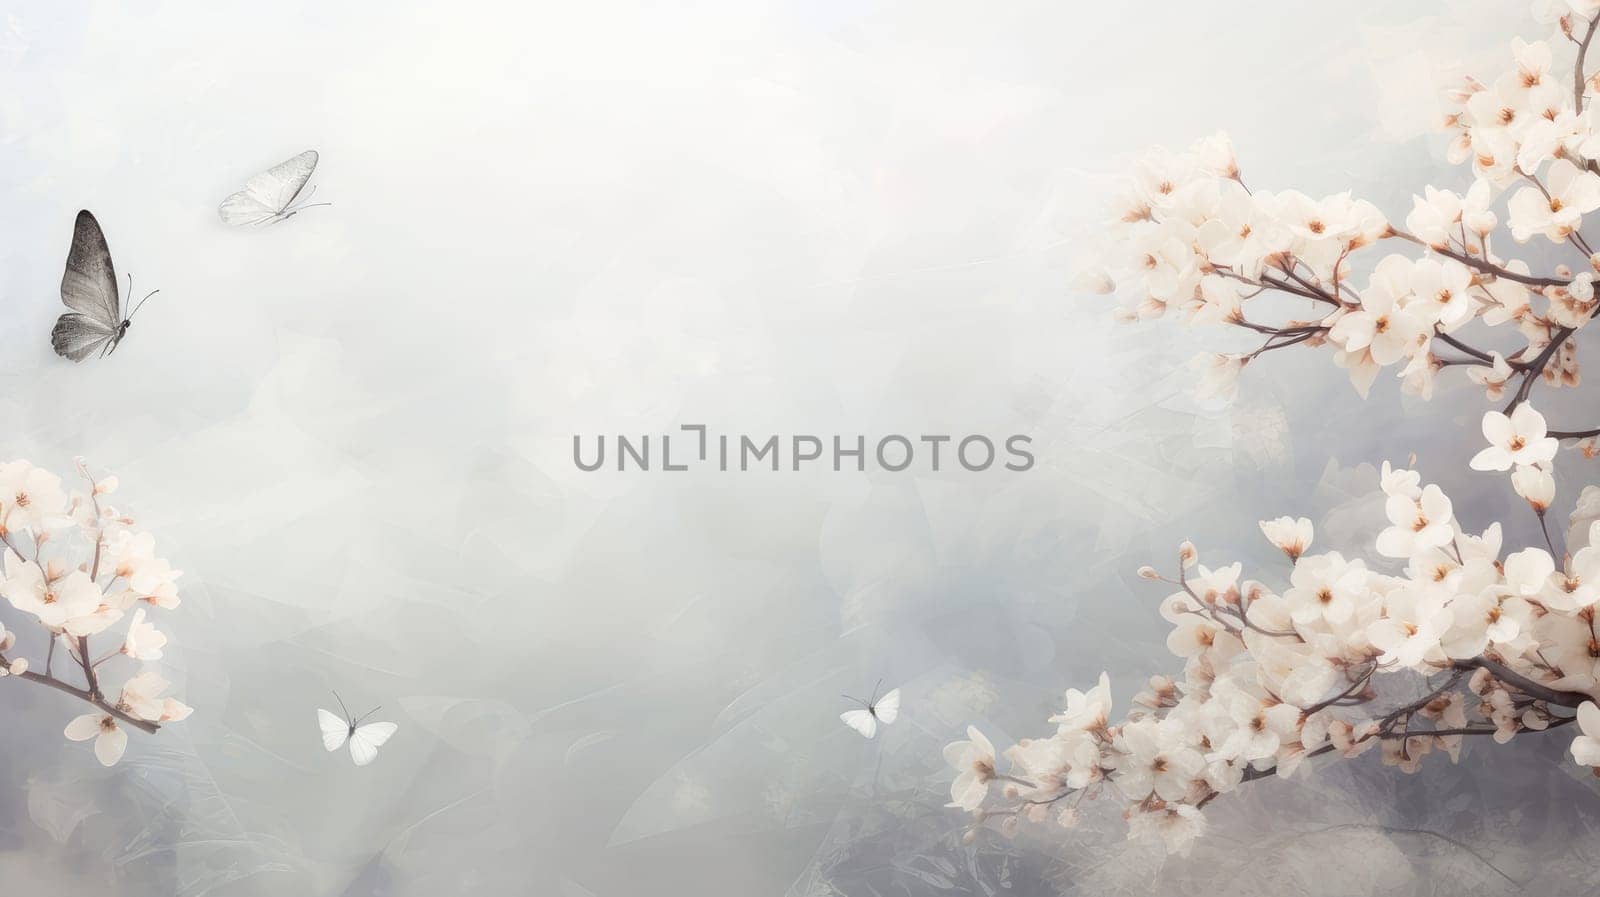 Abstract natural spring background with butterflies and light gray meadow flowers closeup. Colorful artistic image with soft focus and beautiful bokeh in summer spring